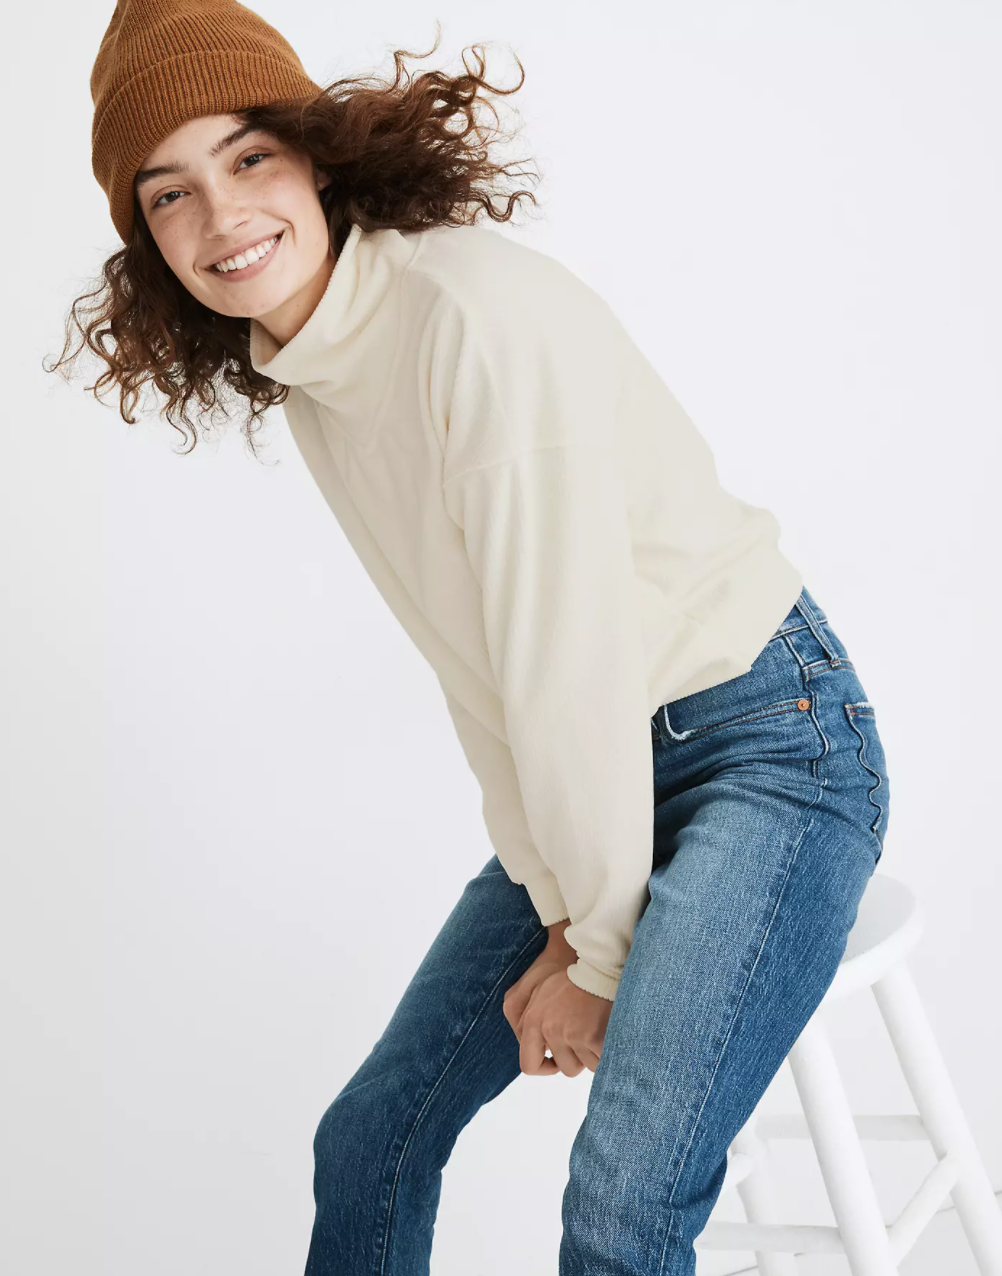 madewell early black friday sale 2020